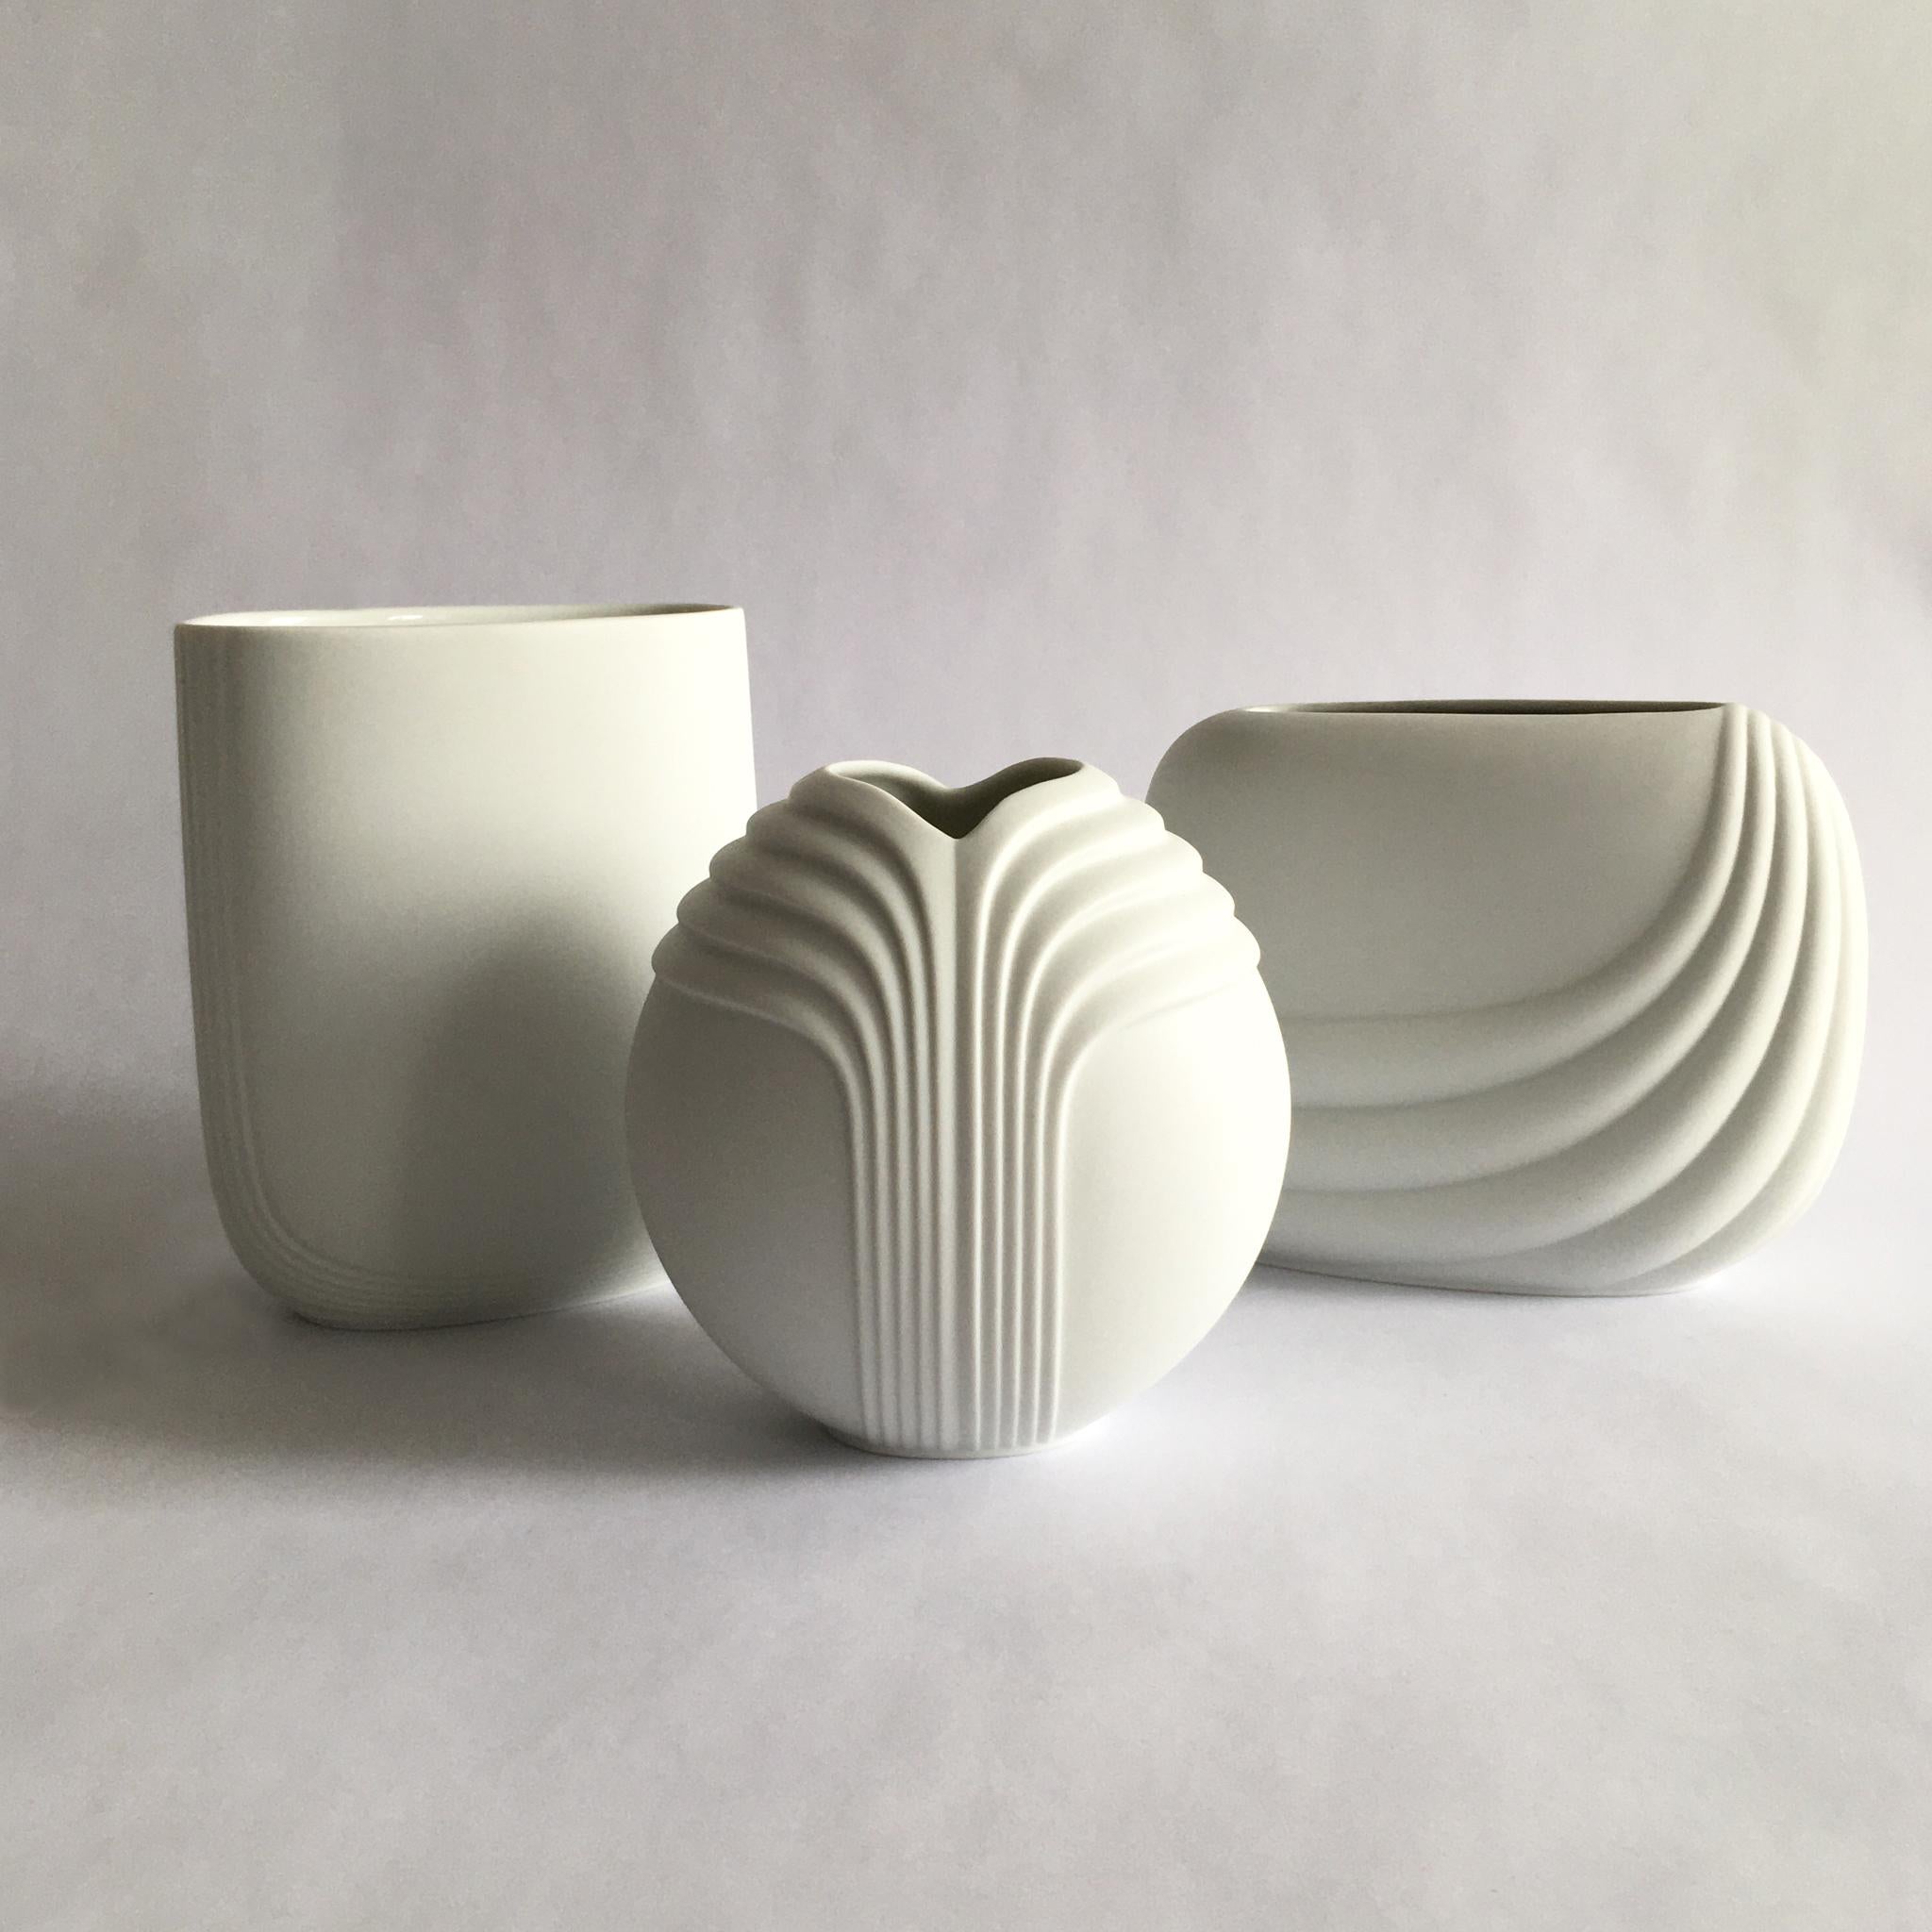 Rosenthal Studio Line by Uta Feyl, White Curved Geometric Porcelain Bisque Vase In Good Condition For Sale In New York, NY